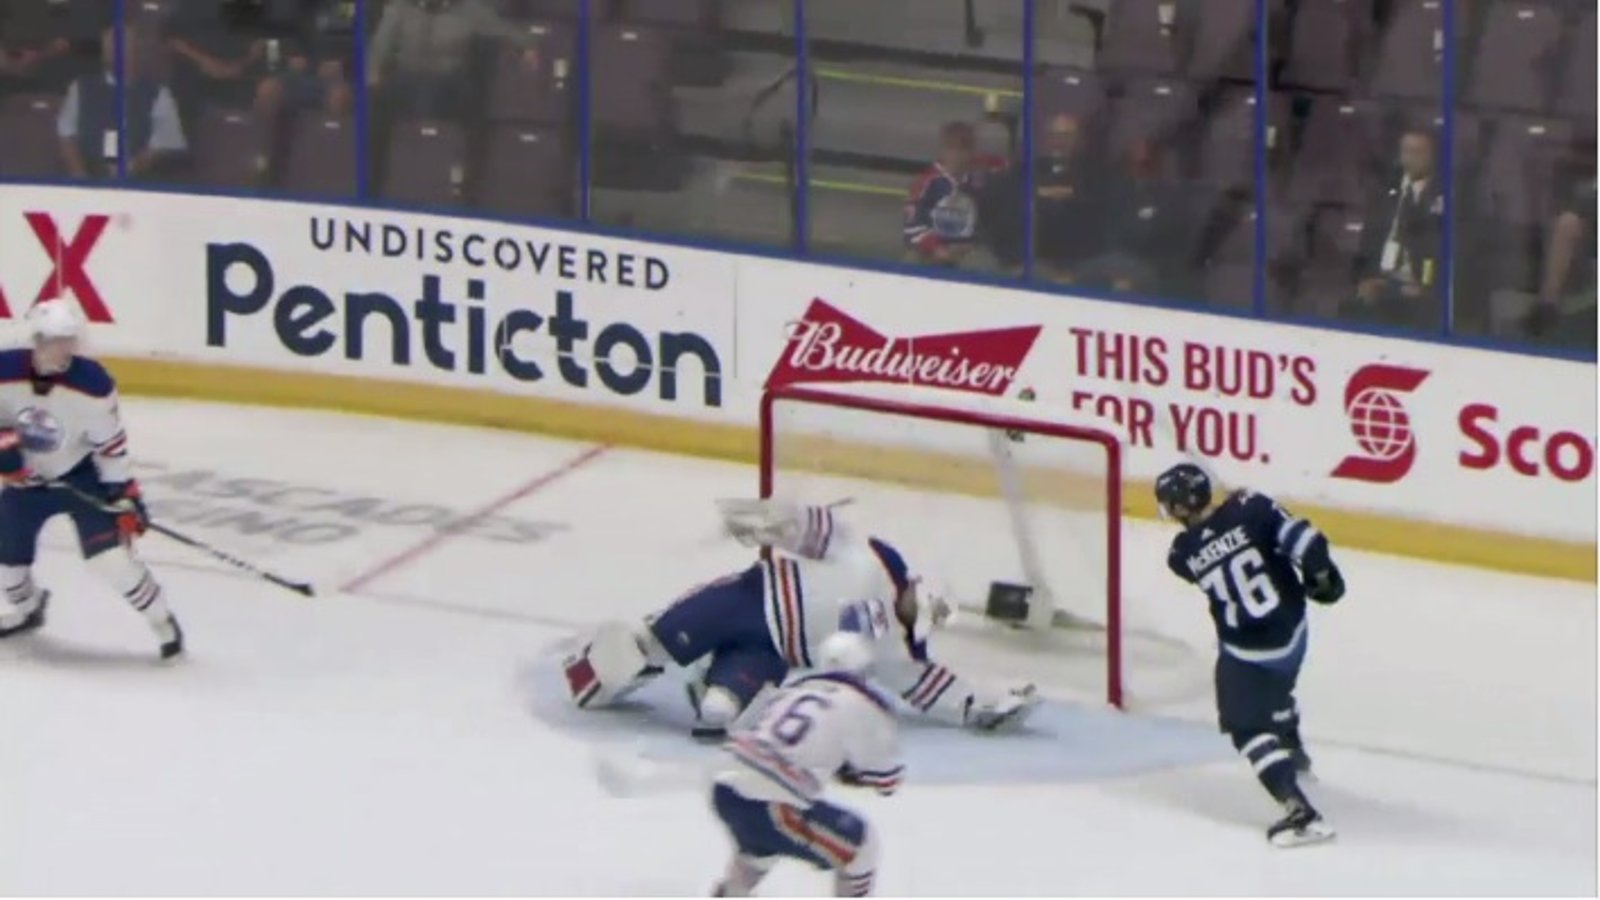 Must See: Oilers prospect makes unbelievable save in Young Stars game